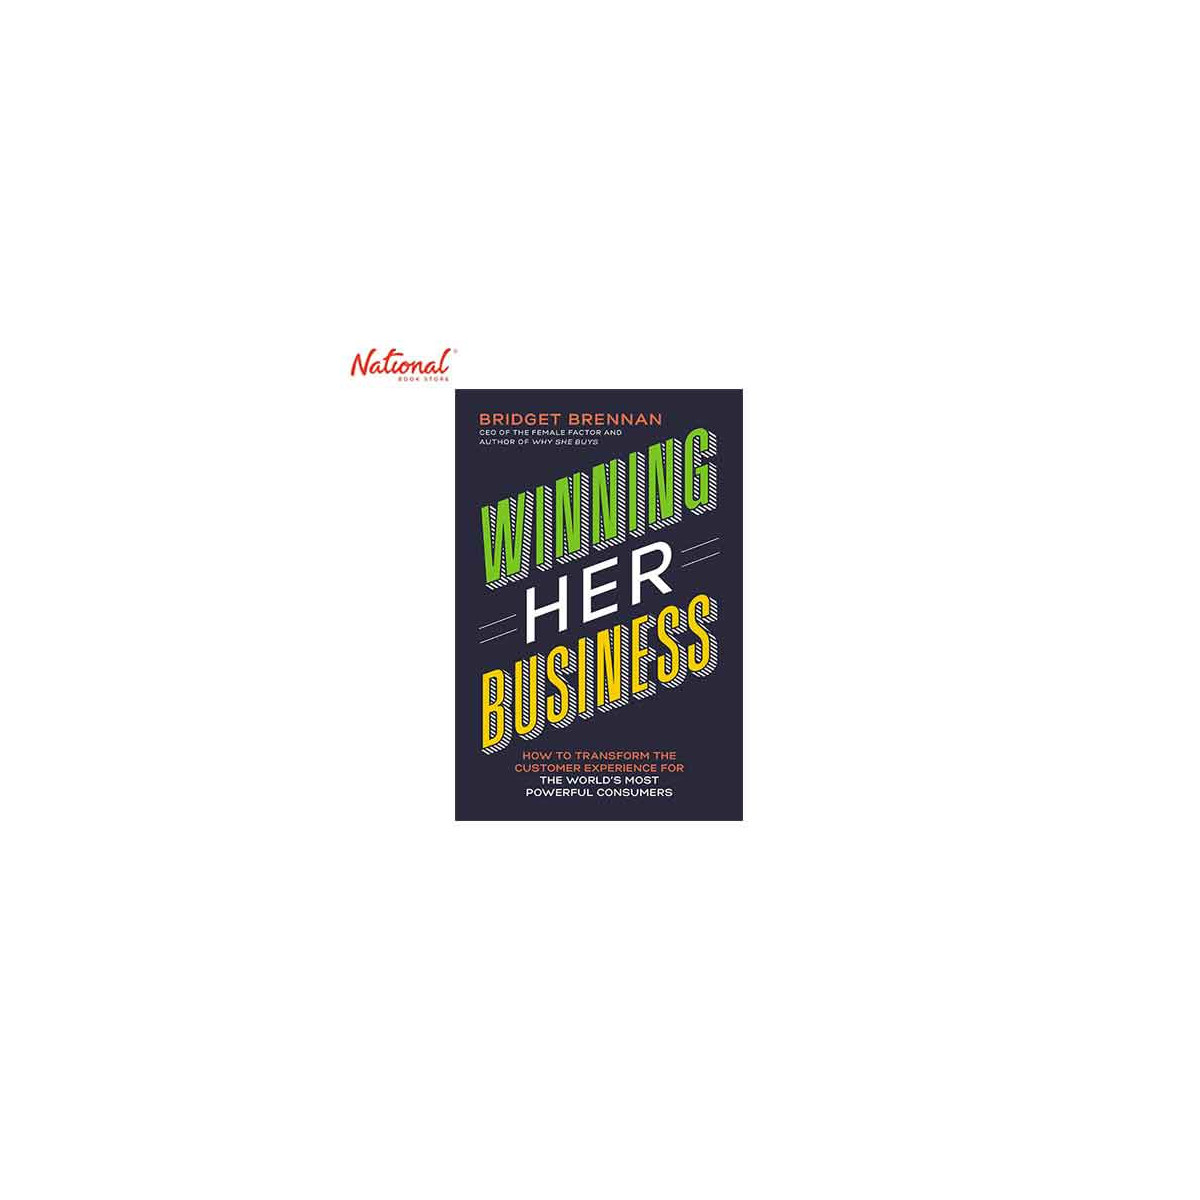 WINNING HER BUSINESS: HOW TO TRANSFORM THE CUSTOMER EXPERIENCE FOR THE WORLD'S MOST POWERFUL CONSUMERS TRADE PAPERBACK